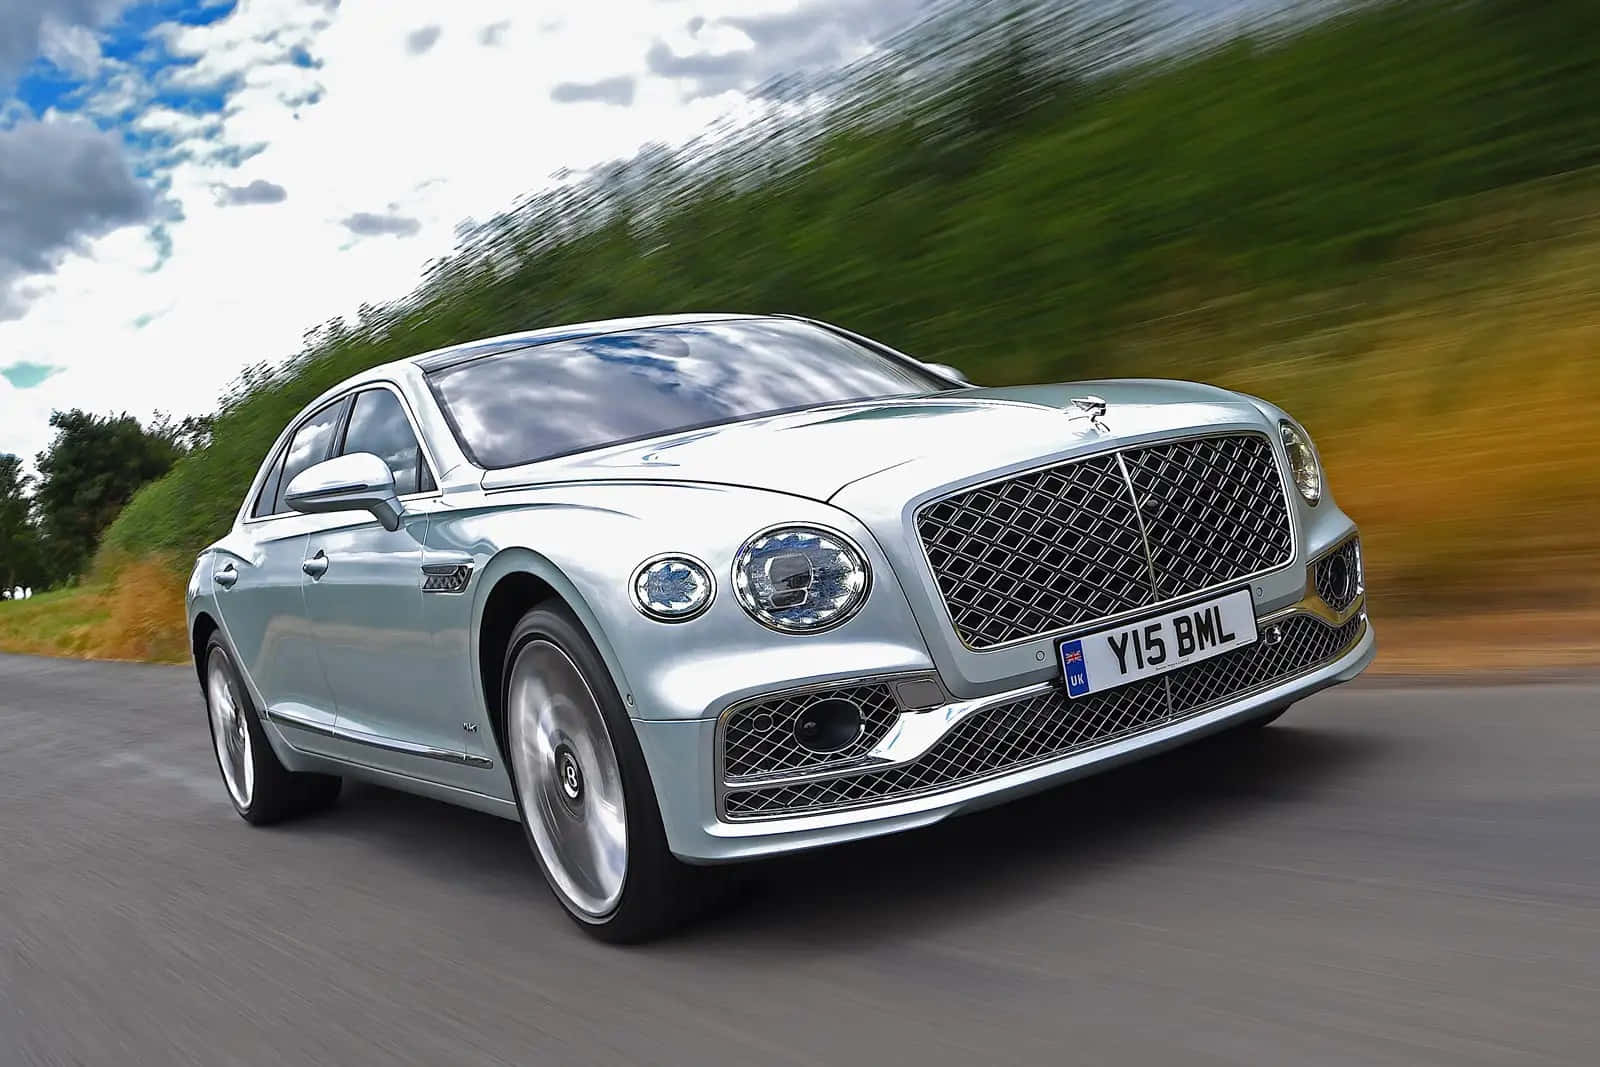 Luxurious Bentley Flying Spur Cruising on the Street Wallpaper